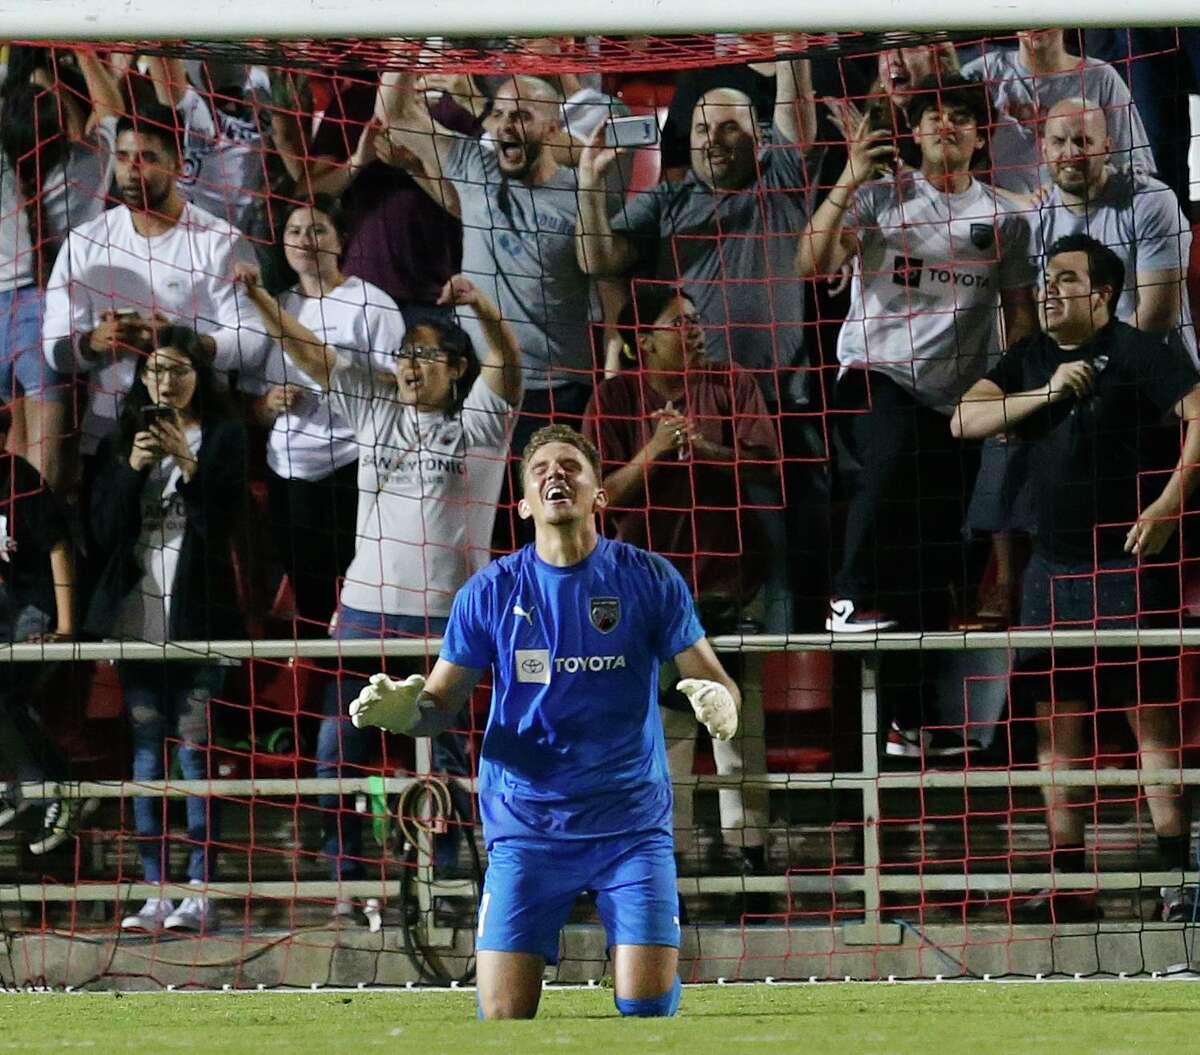 San Antonio FC’s success this season starts with goalkeeper Jordan Farr, who was named USL Player of the Month for September.